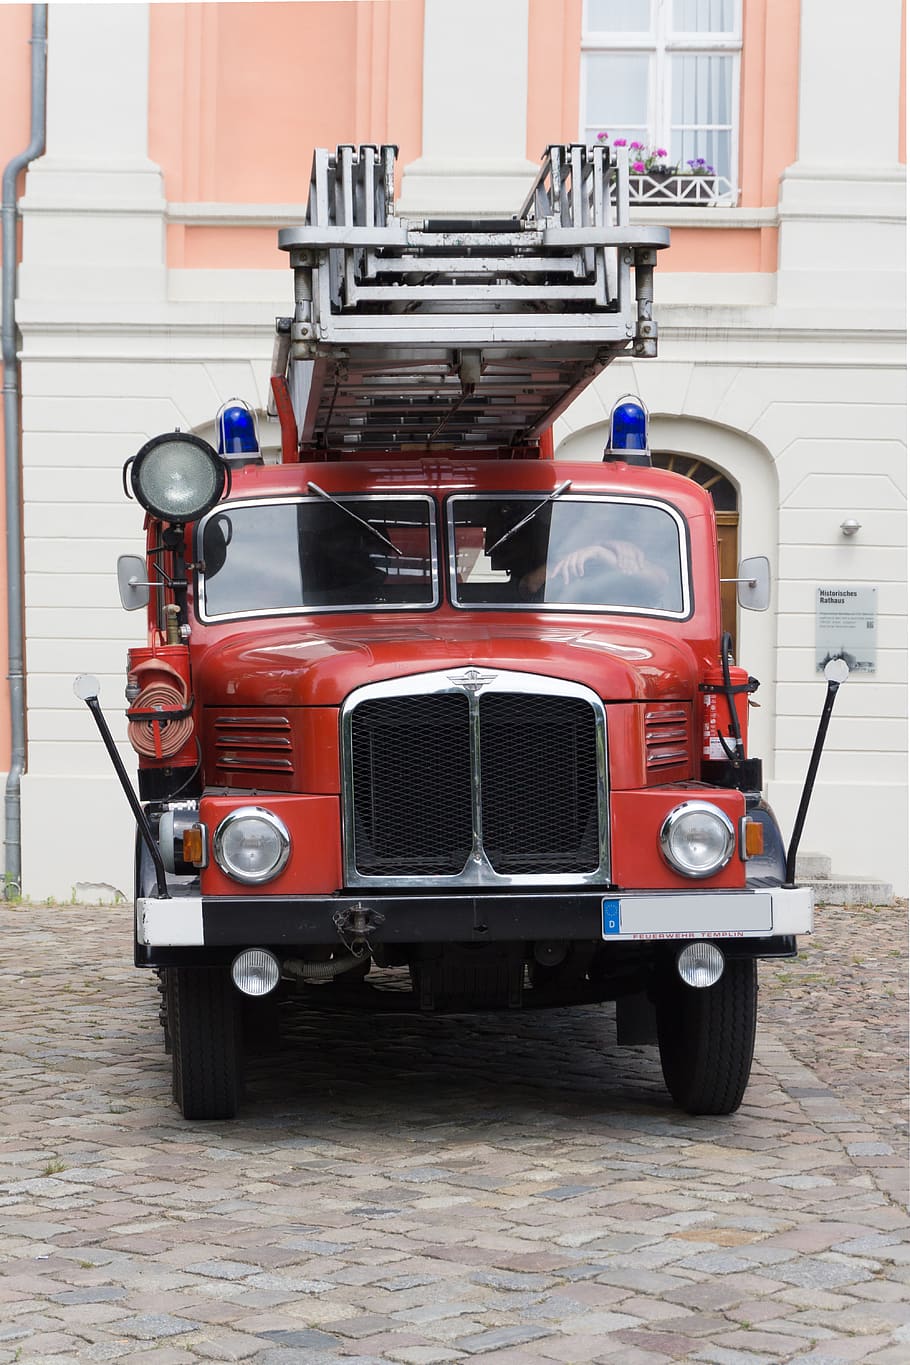 fire, auto, red, old, oldtimer, fire truck, vehicle, automotive, fire fighting, mode of transportation